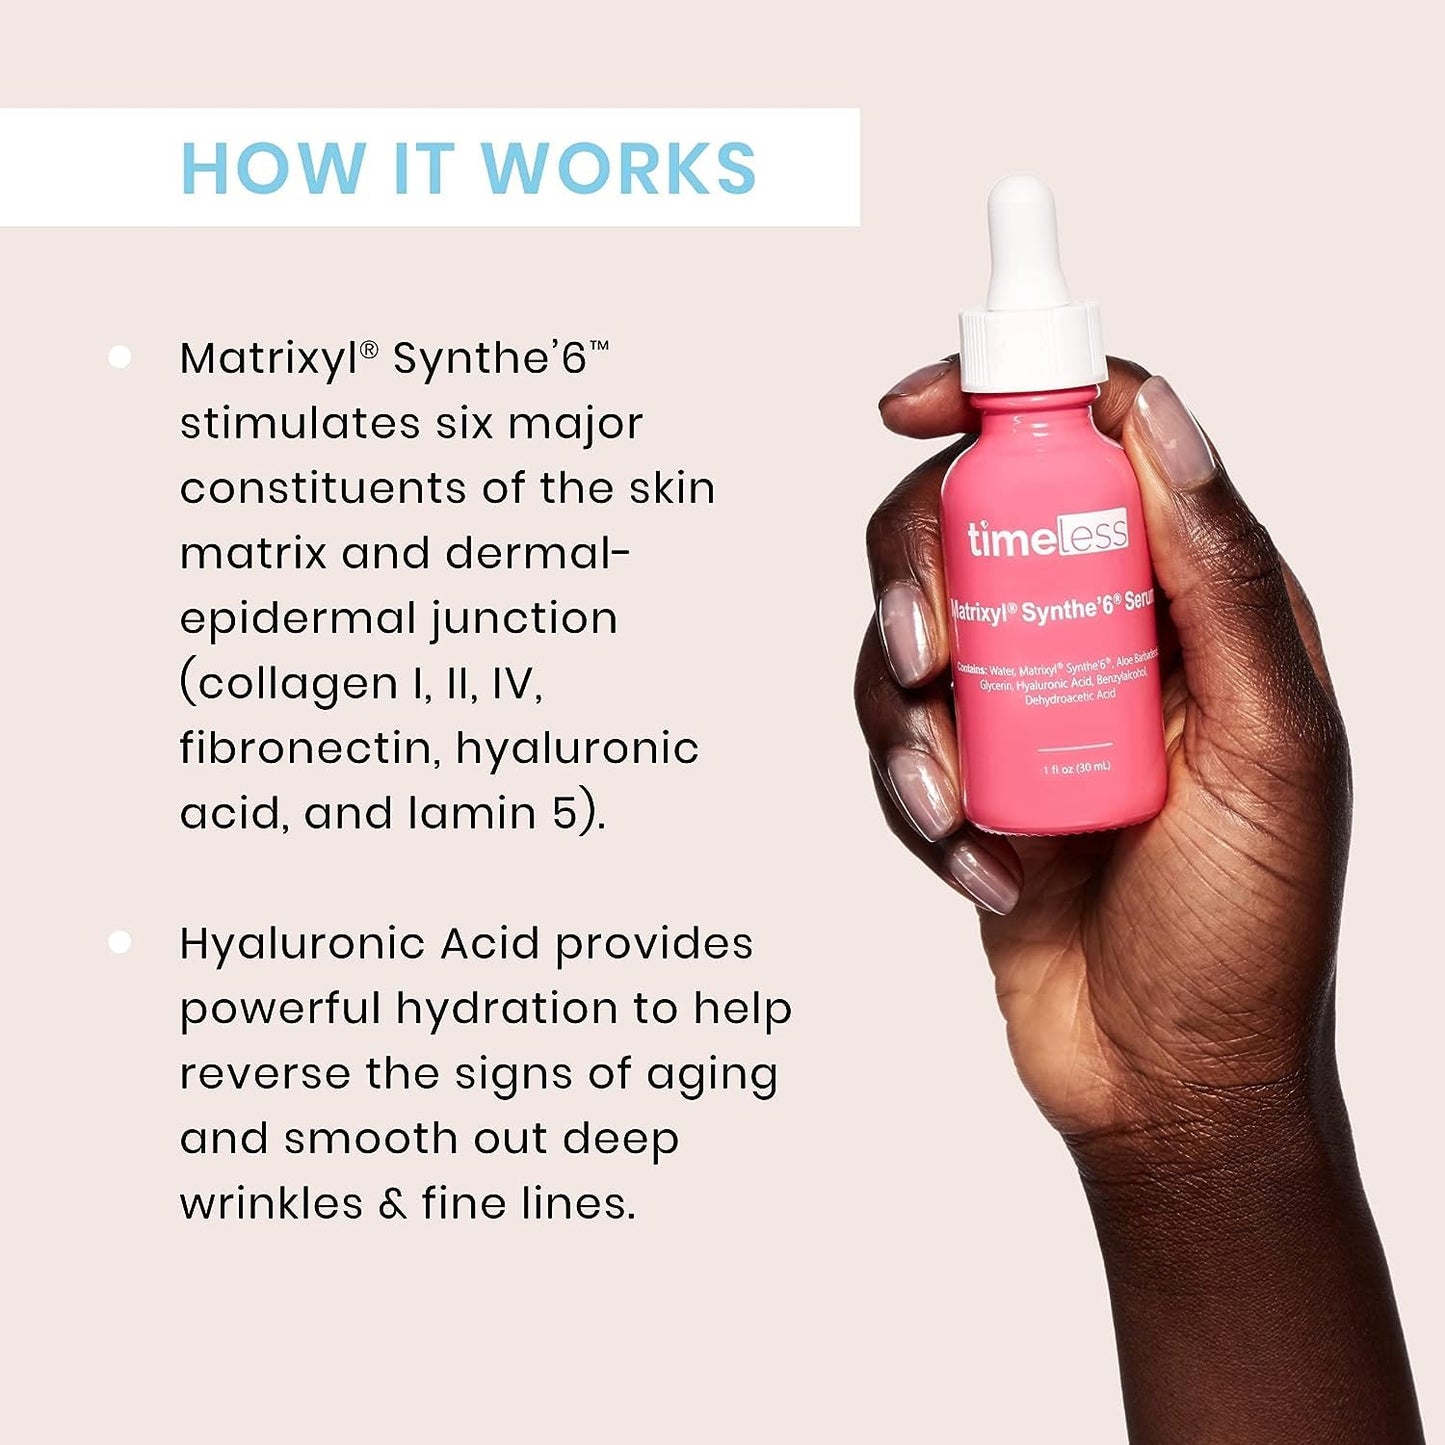 Timeless Skin Care Matrixyl Synthe’6 Serum - Skin-Focused Face Serum - Matrixyl Serum Infused with Hyaluronic Acid for Skin Moisture 1 Oz